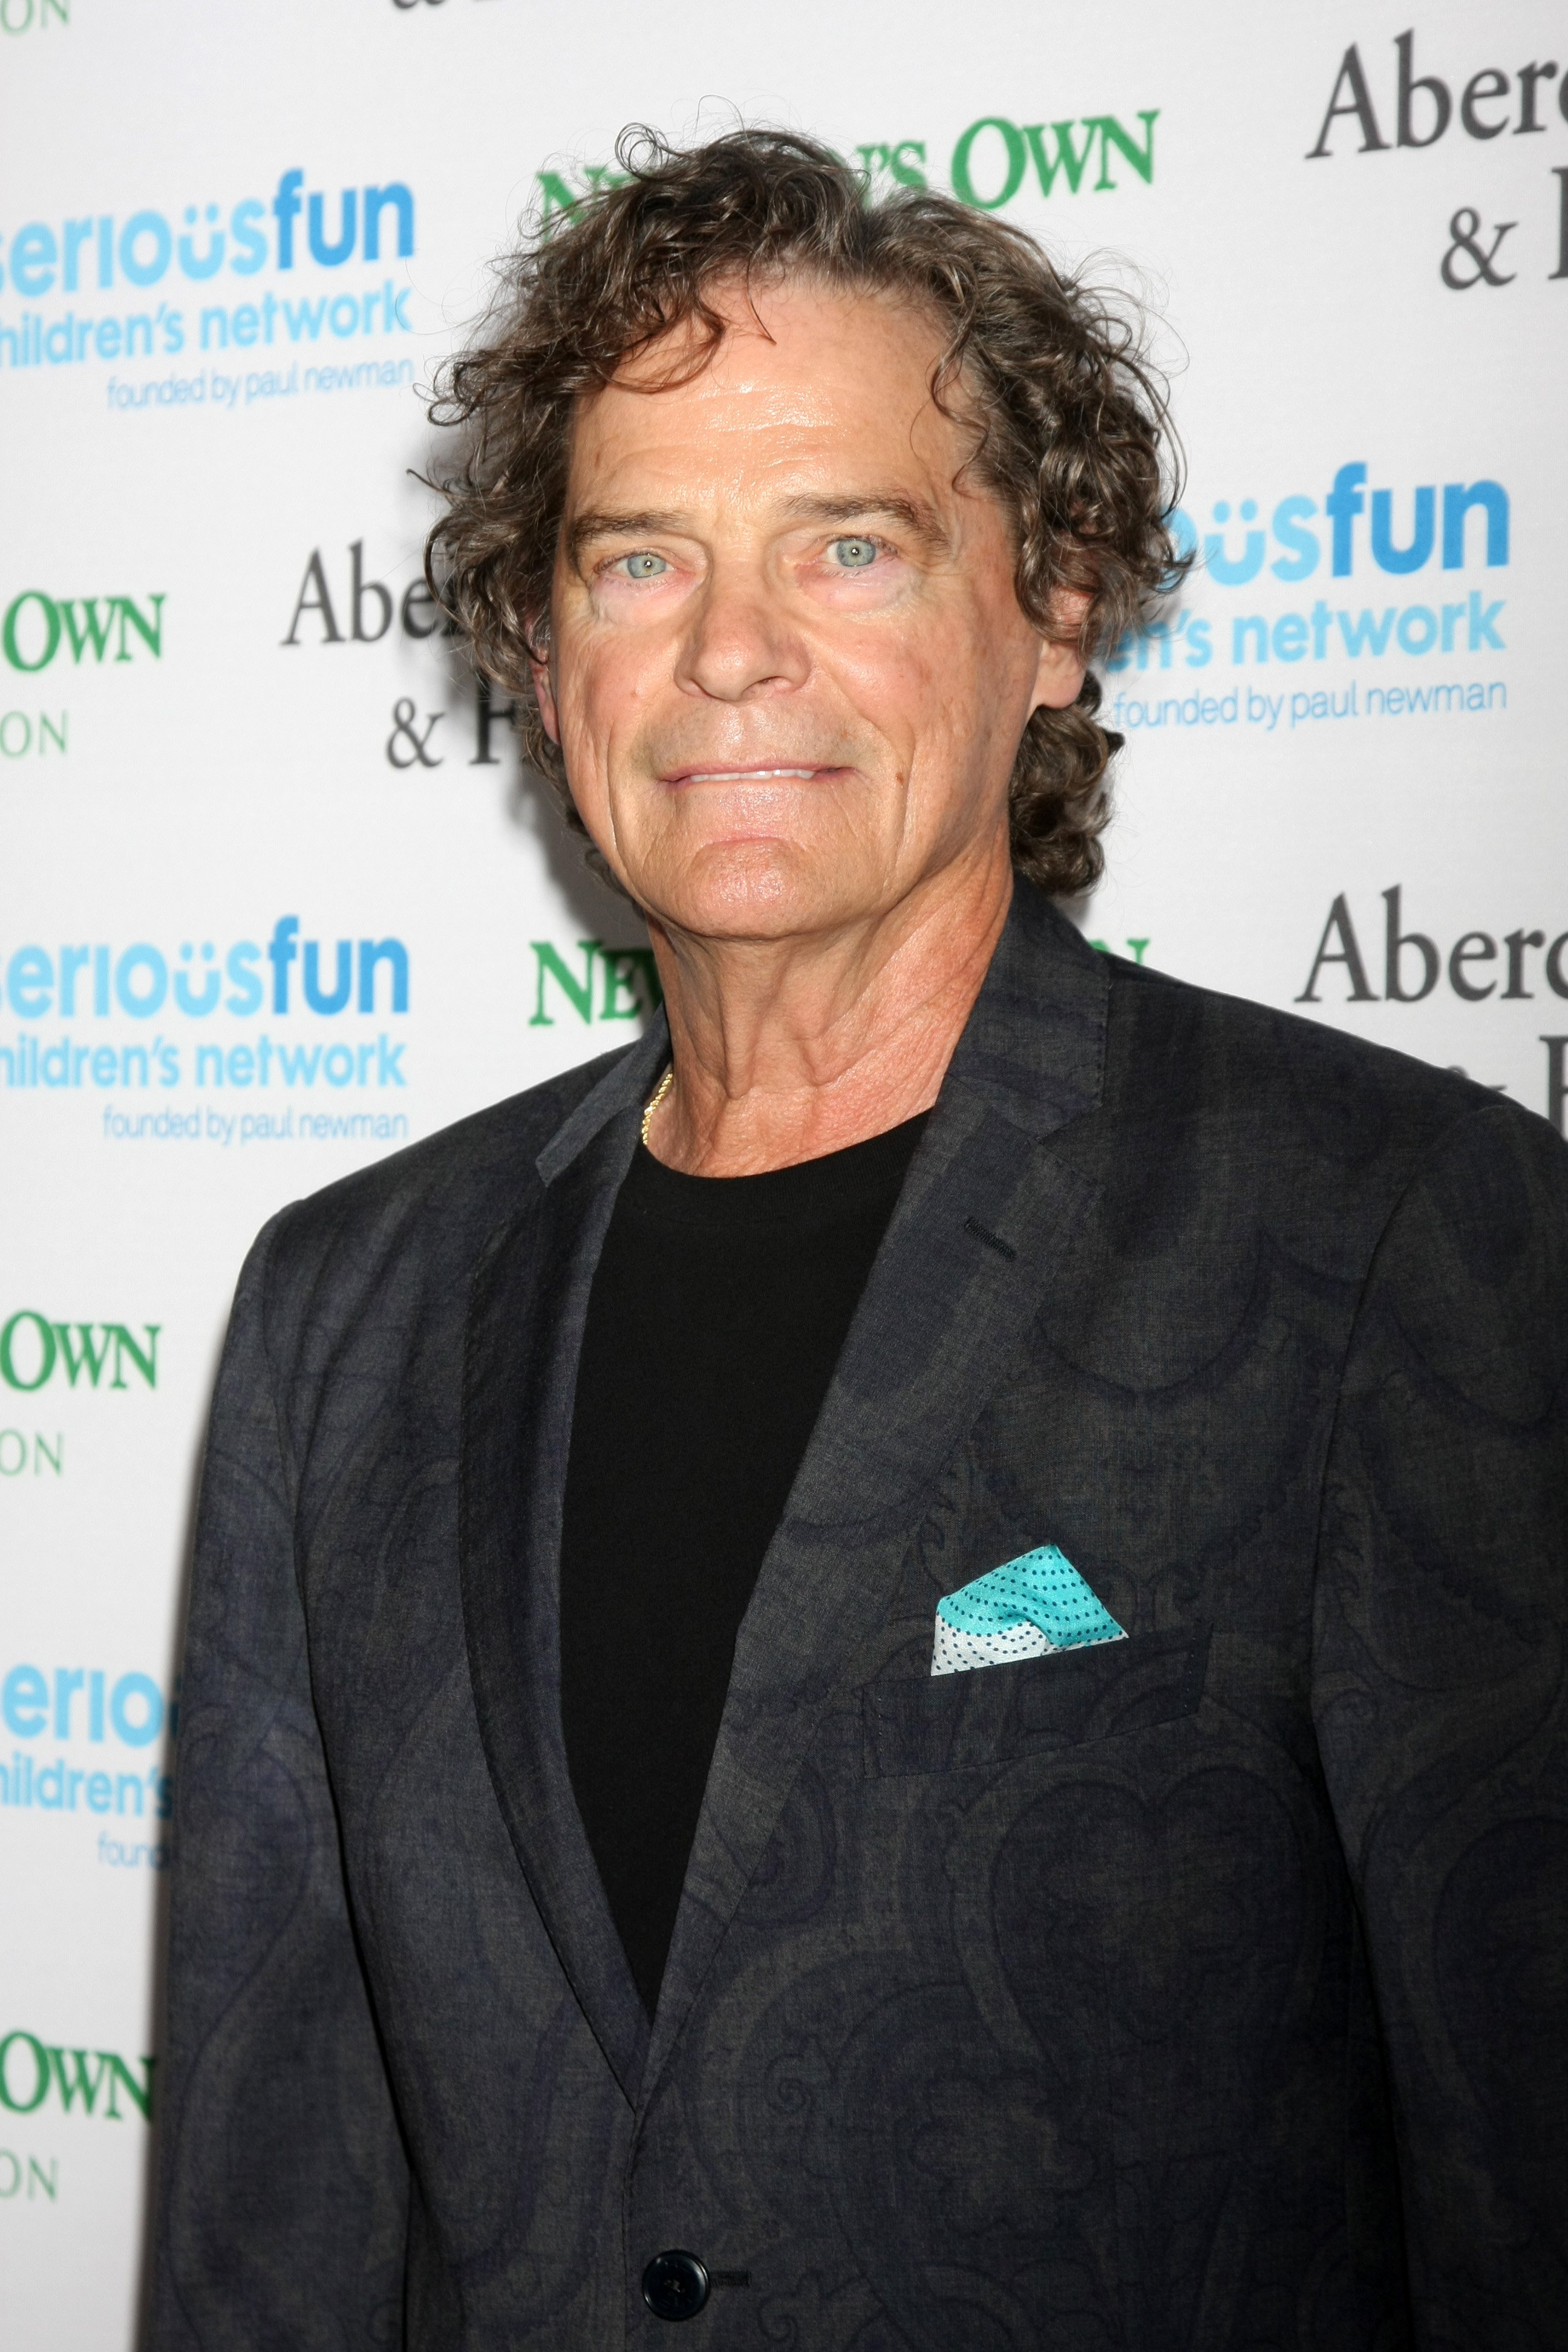 BJ Thomas at the SeriousFun Children's Network 2015 LA Gala at the Dolby Theater on May 14, 2015 in Los Angeles, CA | Photo: Shutterstock